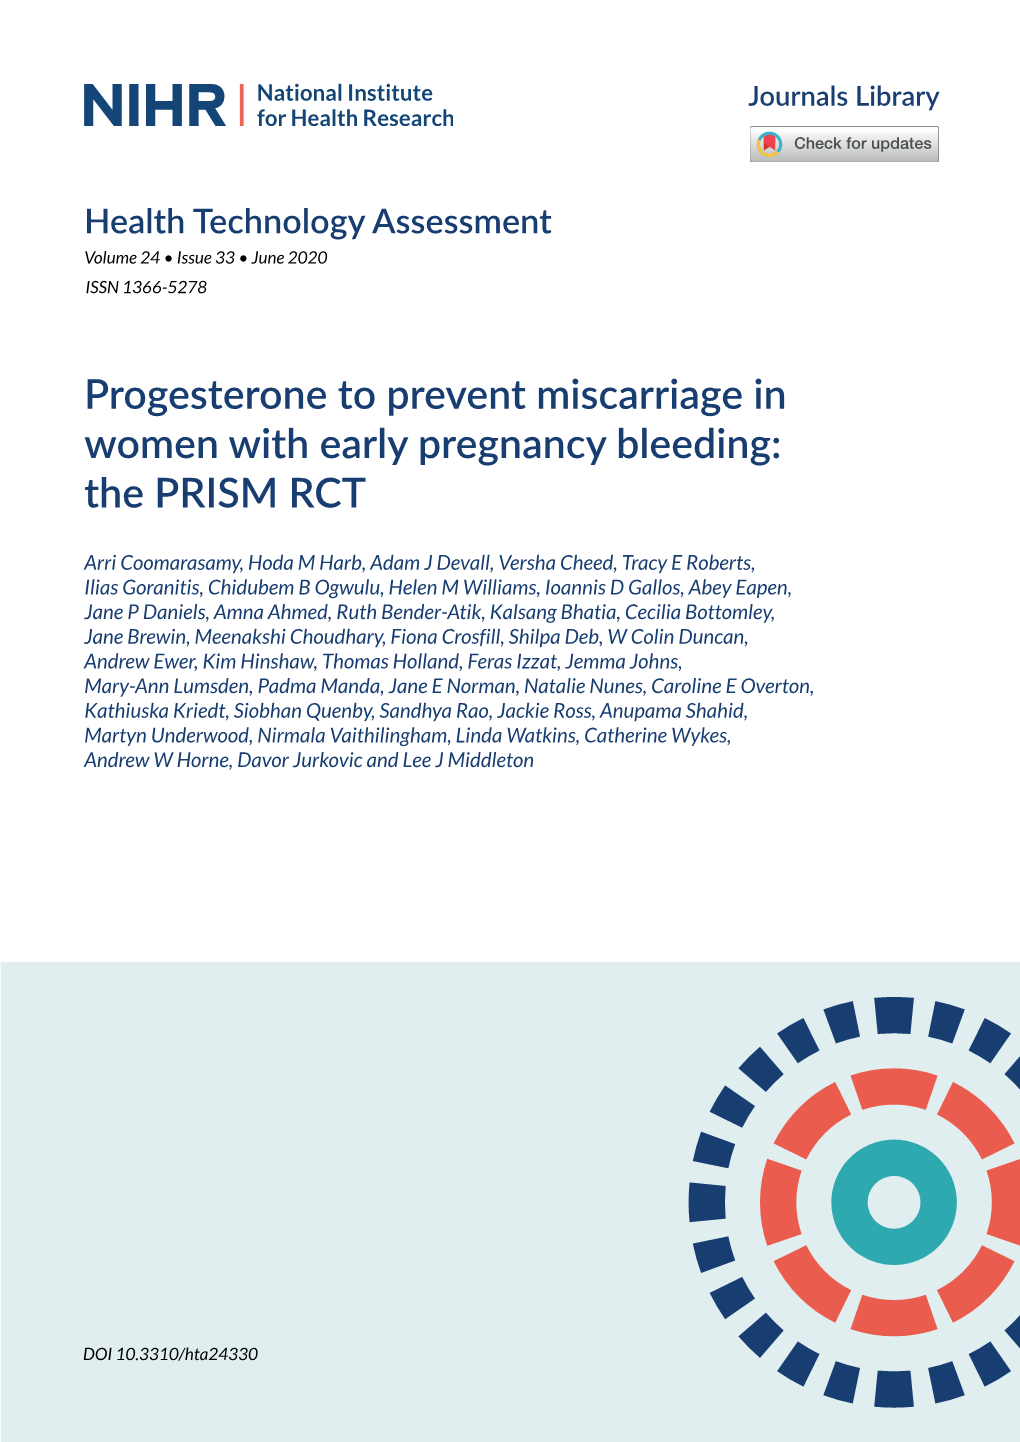 Progesterone to Prevent Miscarriage in Women with Early Pregnancy Bleeding: the PRISM RCT